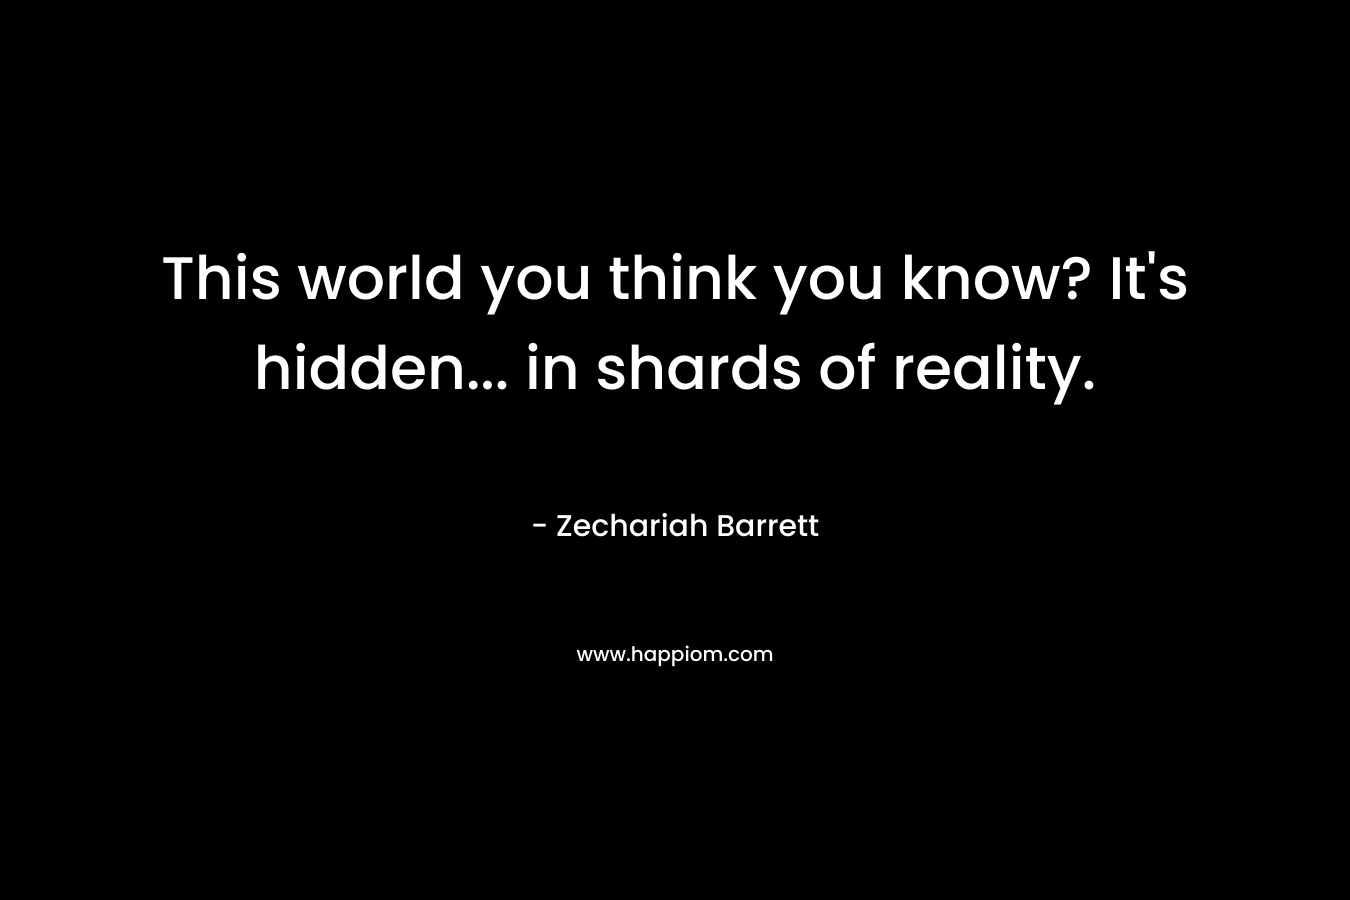 This world you think you know? It’s hidden… in shards of reality. – Zechariah Barrett